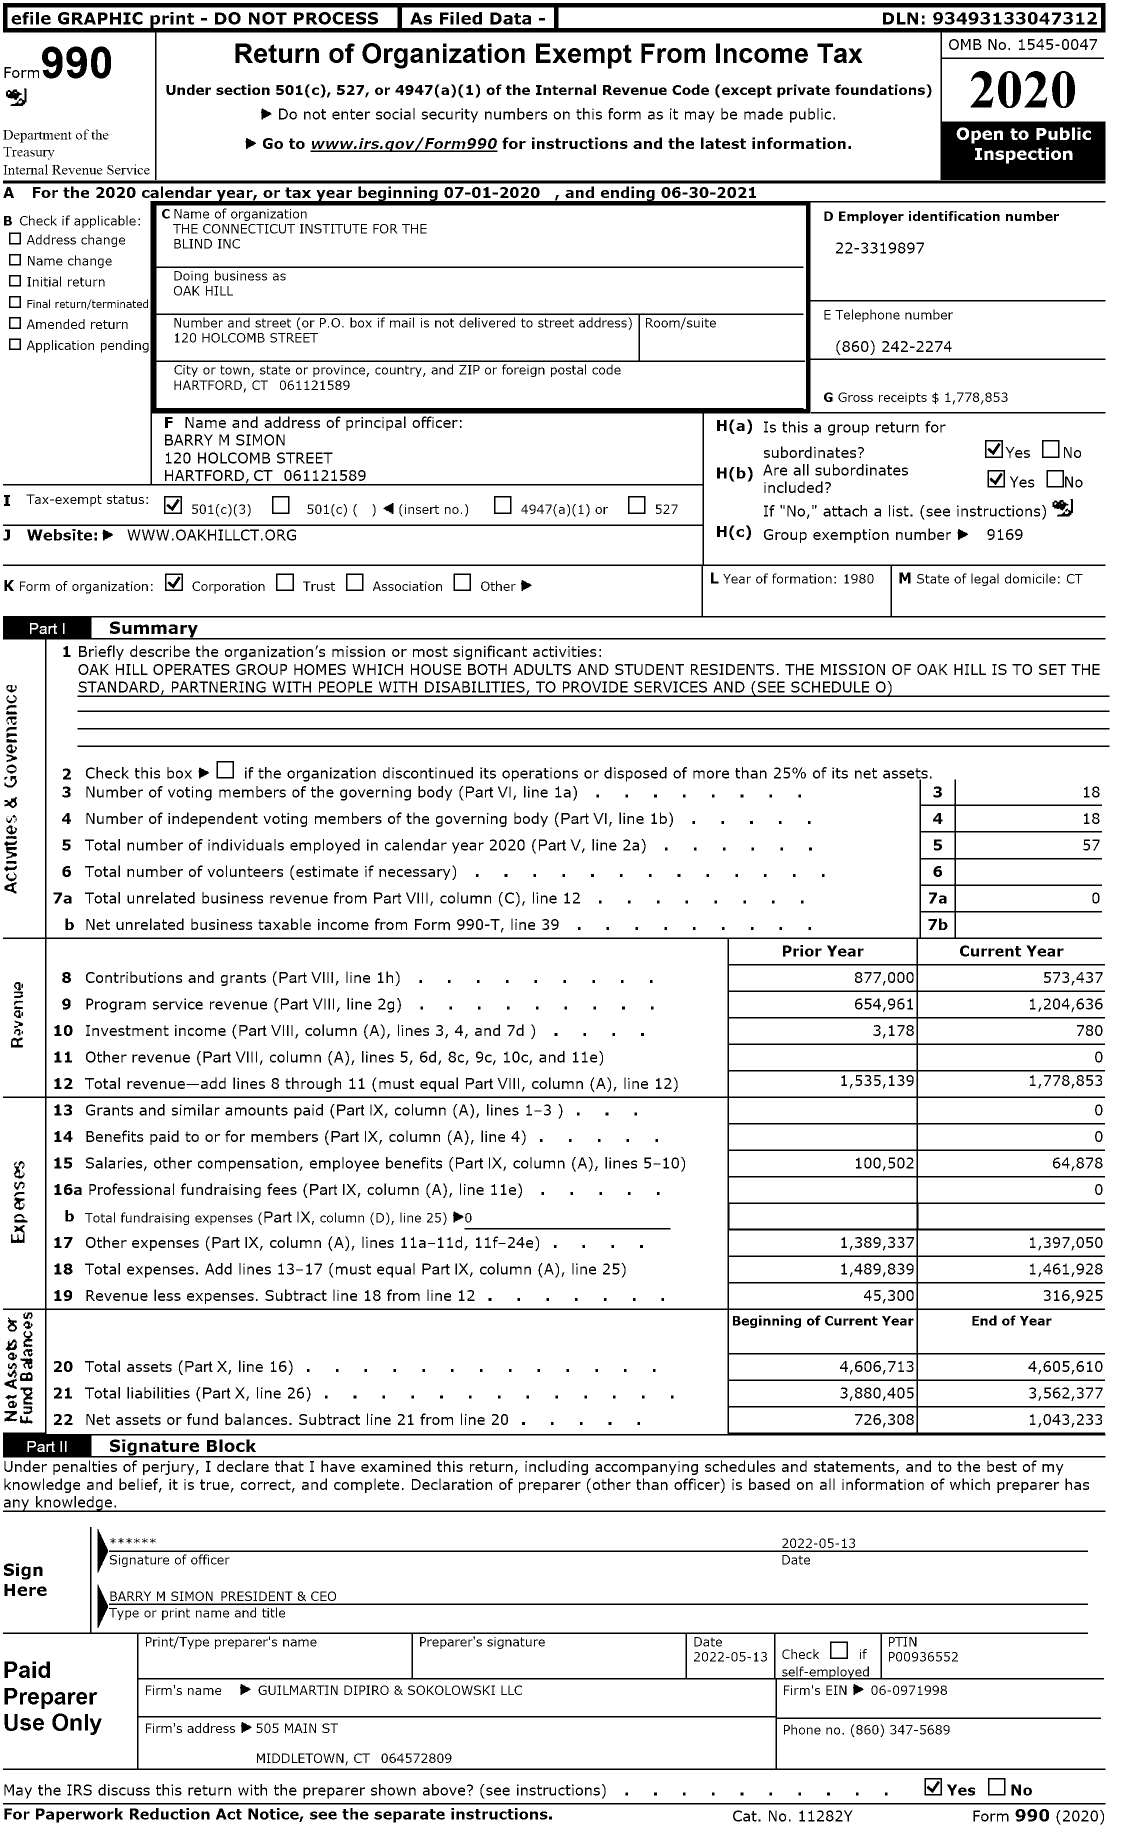 Image of first page of 2020 Form 990 for Oak Hill / The Connecticut Institute for the Blind Inc